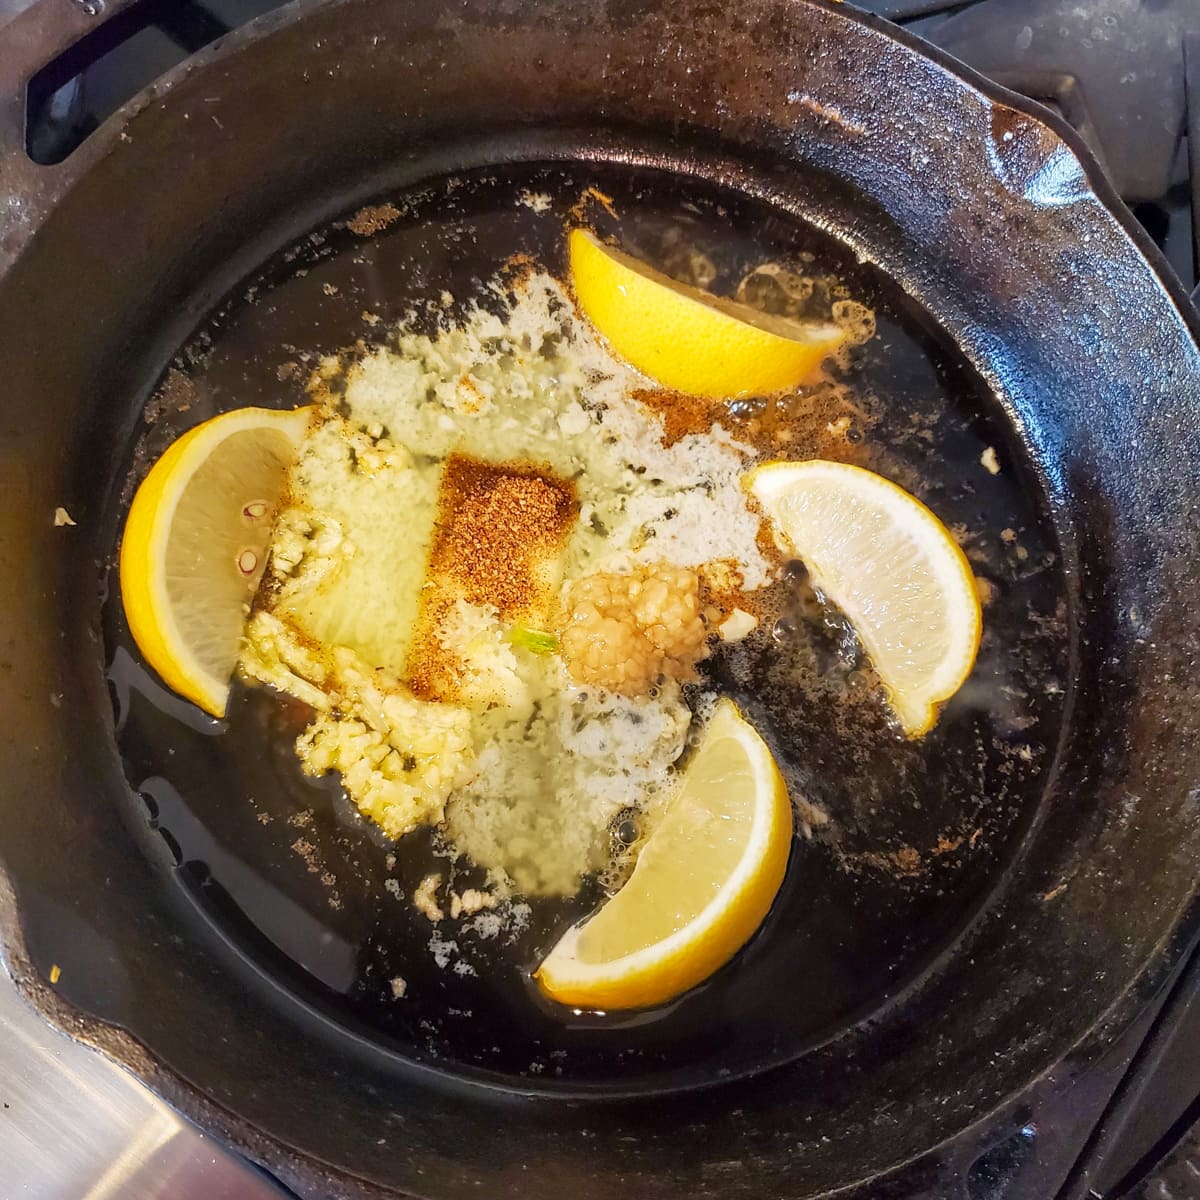 Garlic and lemon cooking in a cast iron pan.